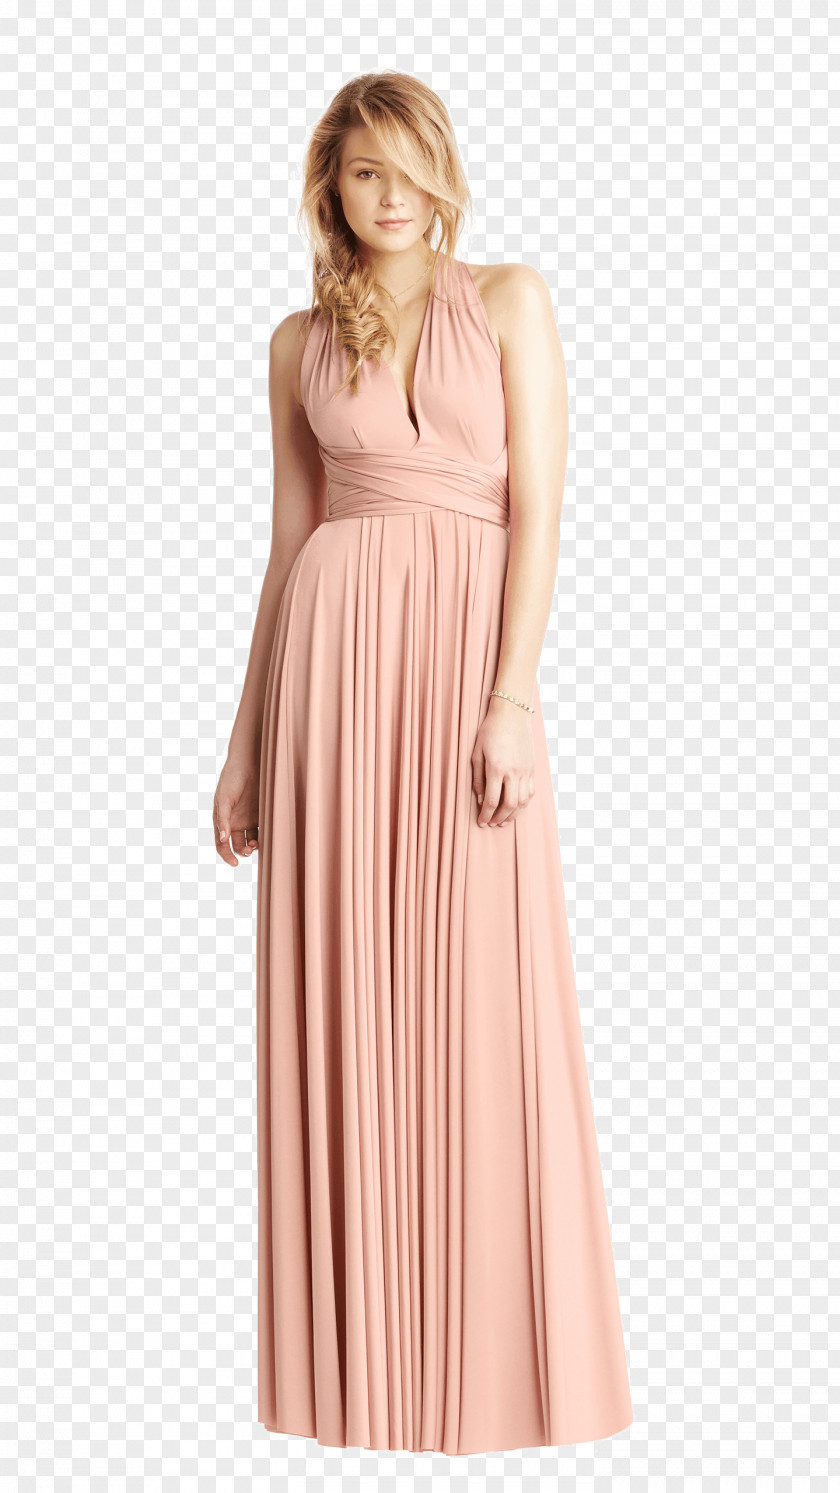 Blush Floral Wedding Dress Clothing Bridesmaid Gown PNG